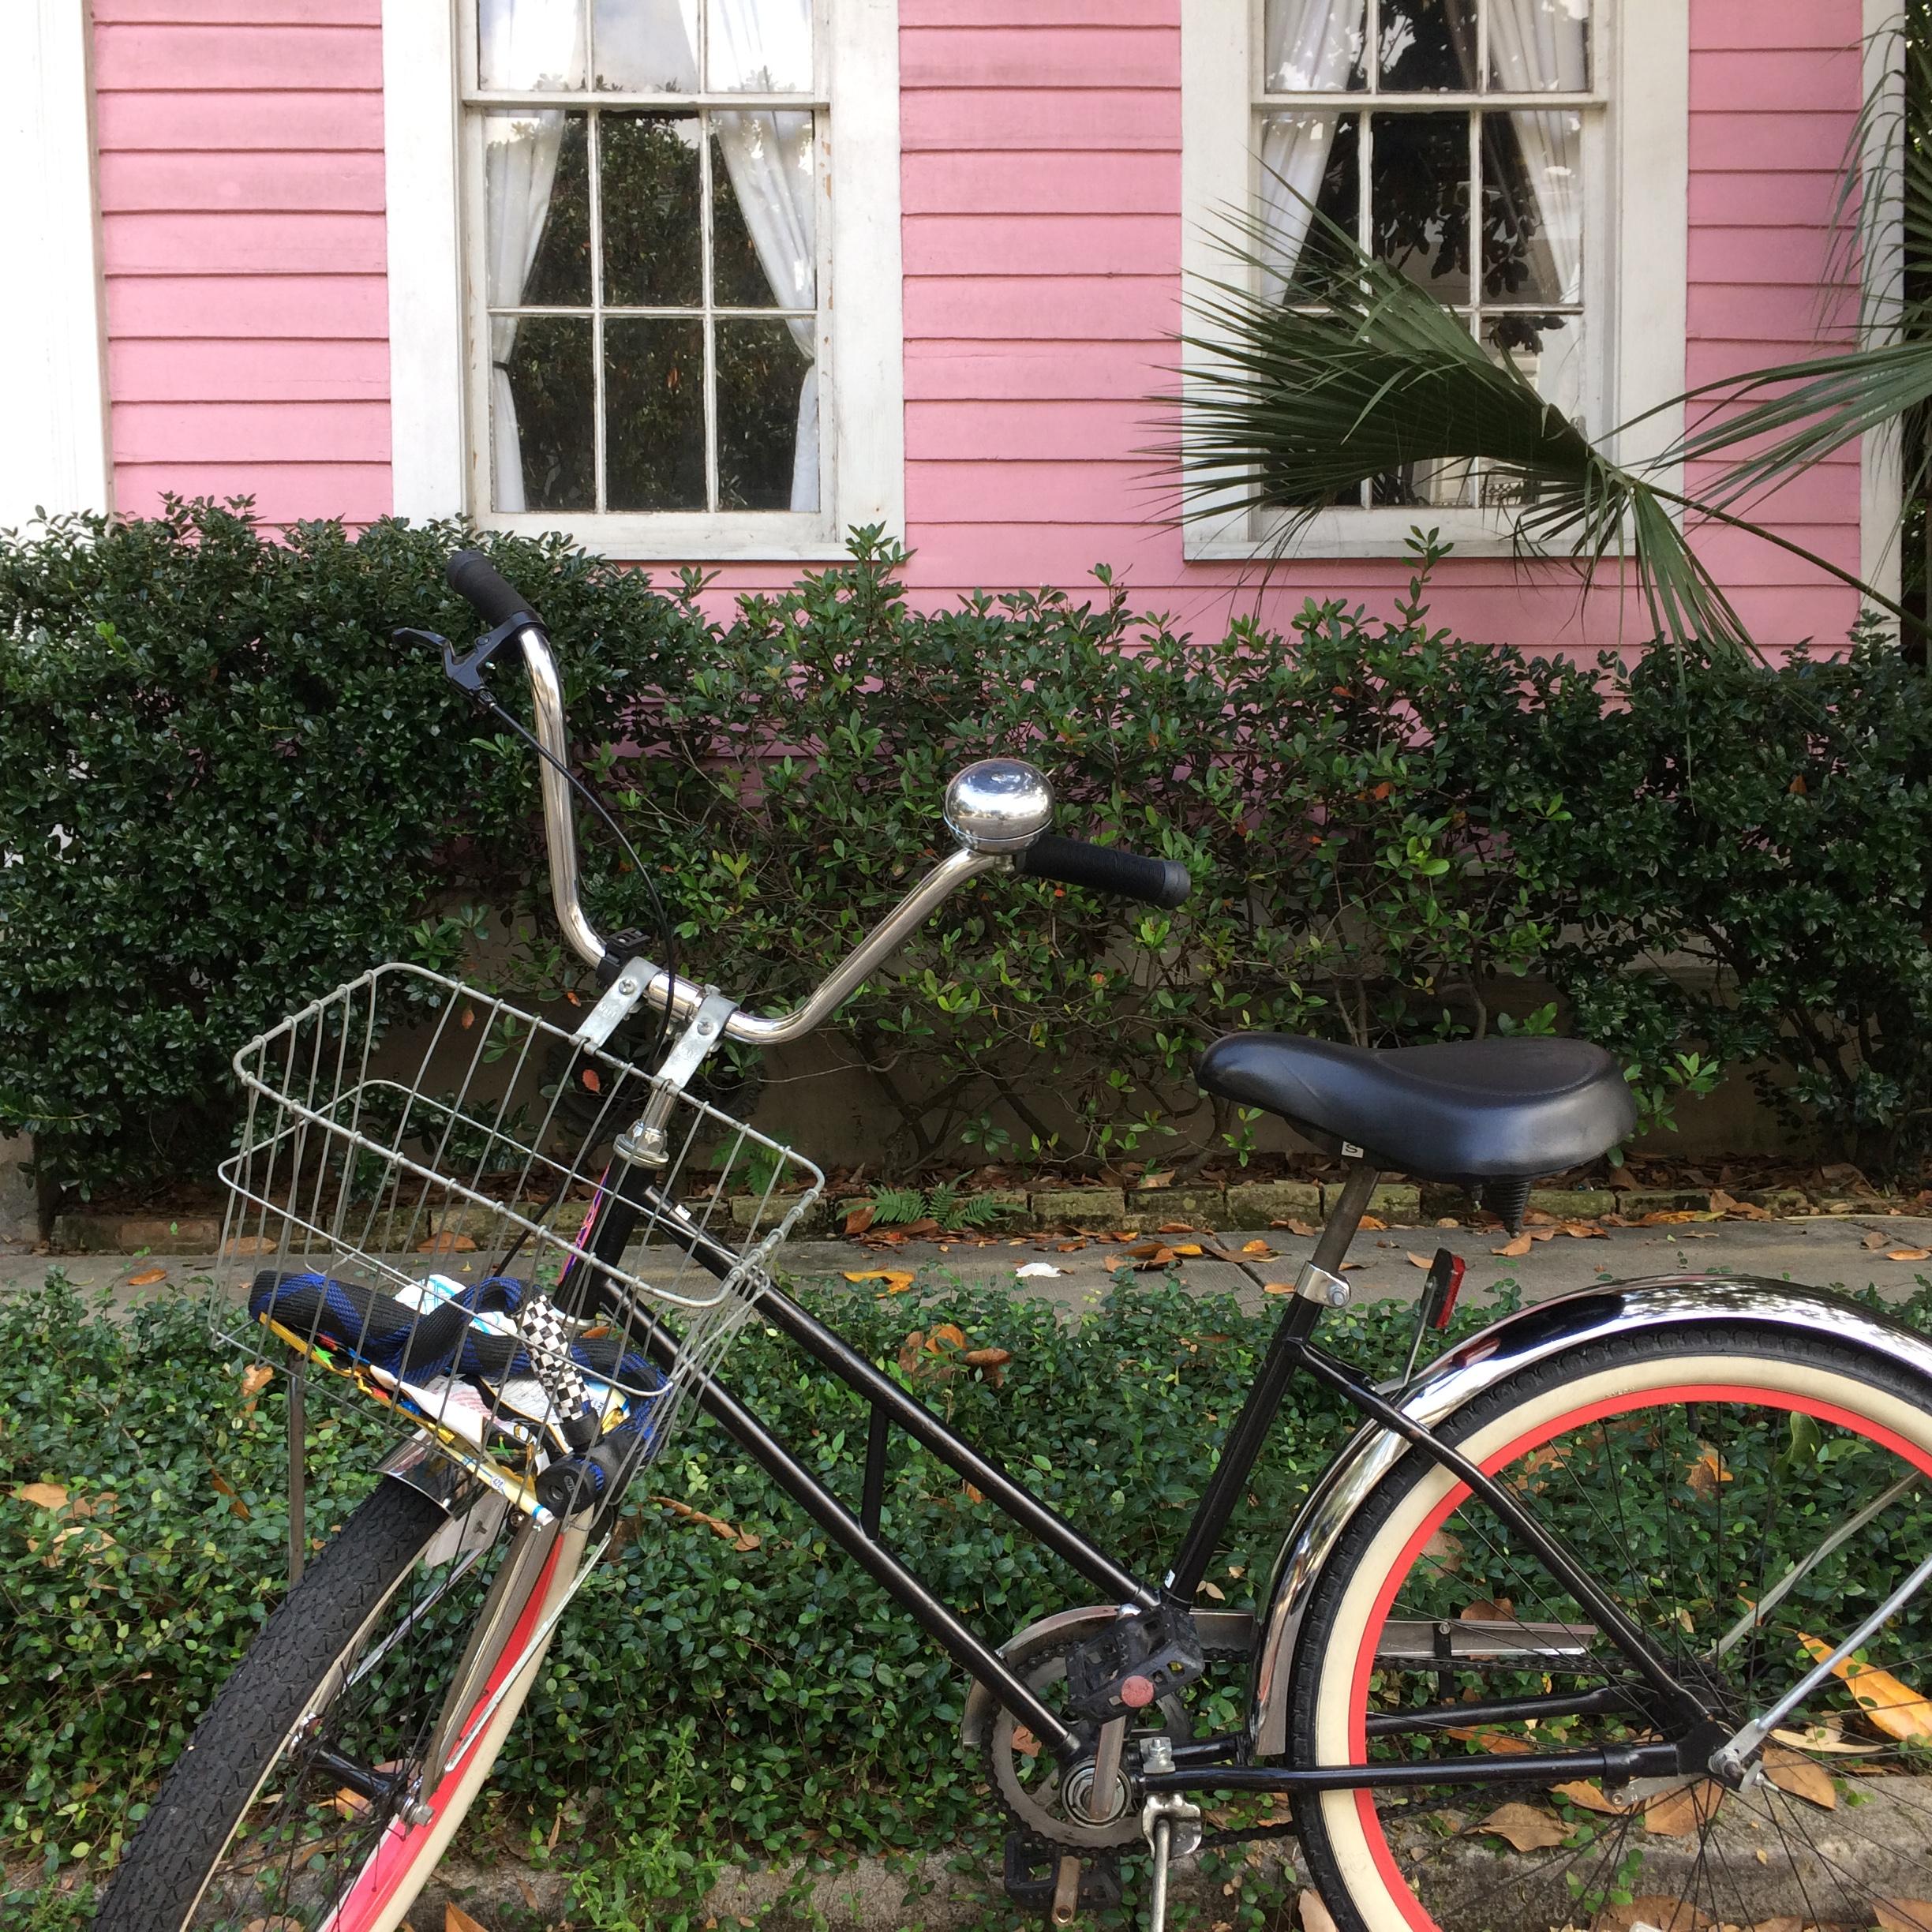 The number of people taking up bikeshares in Louisiana has soared in recent years